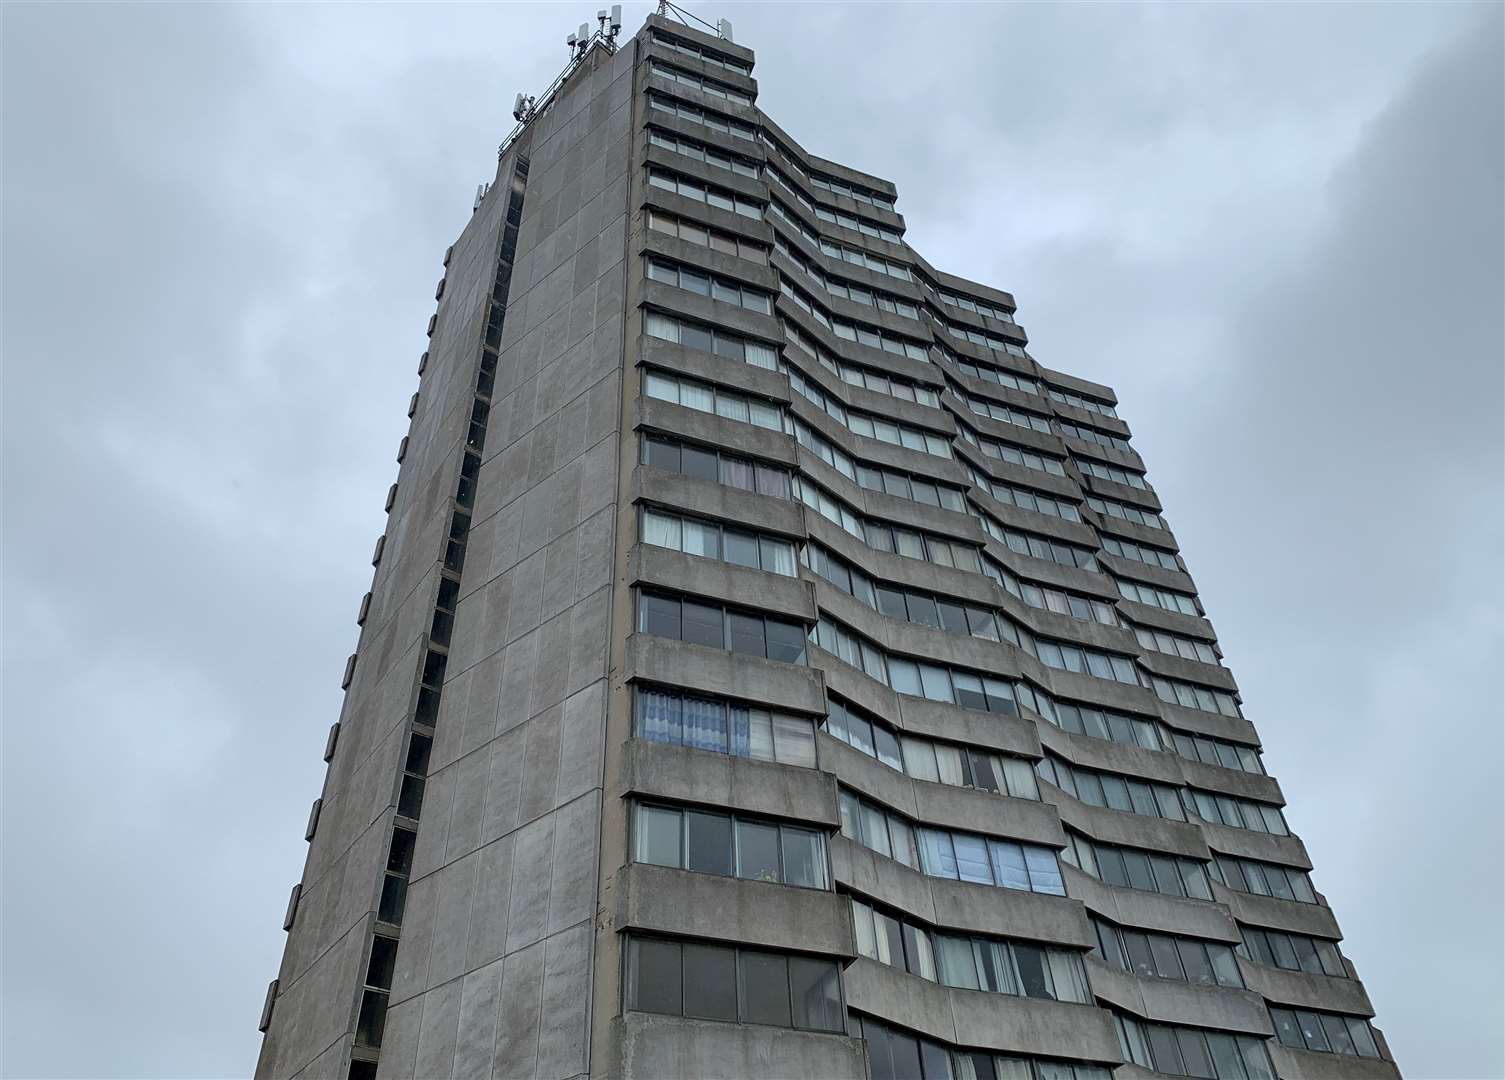 Arlington House is an iconic landmark in Margate and a classic example of Brutalist architecture